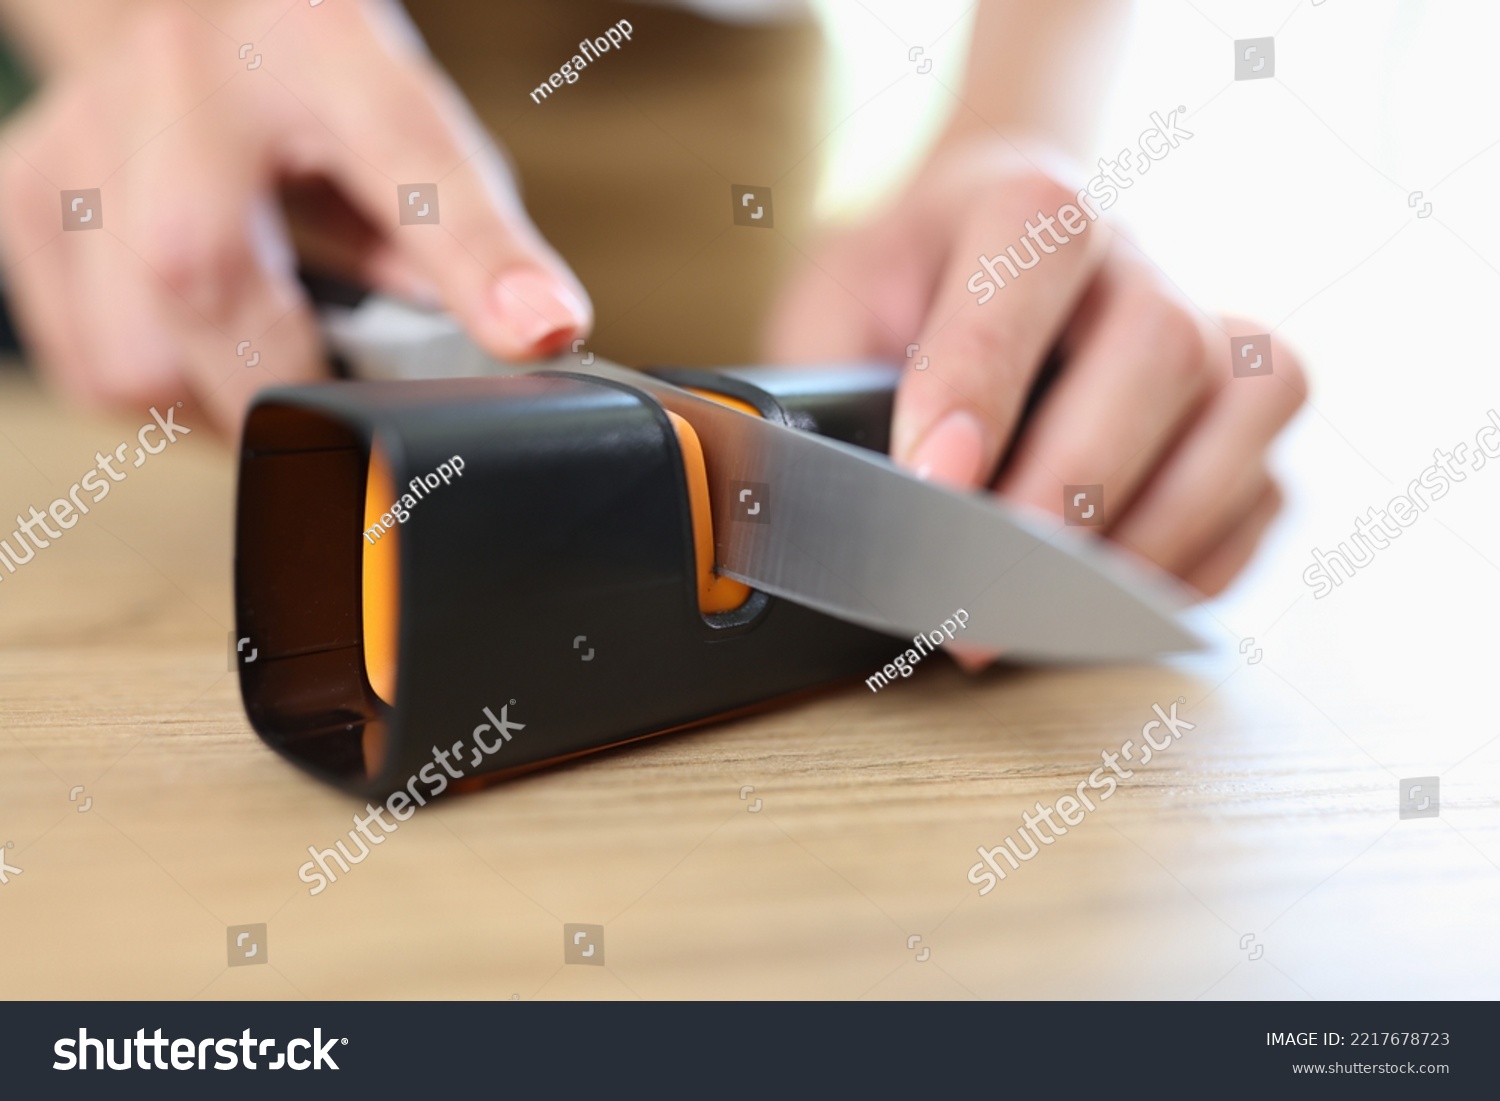 Close-up of woman sharpening knife with special knife sharpener. Grindstone, kitchen tools and devices concept #2217678723